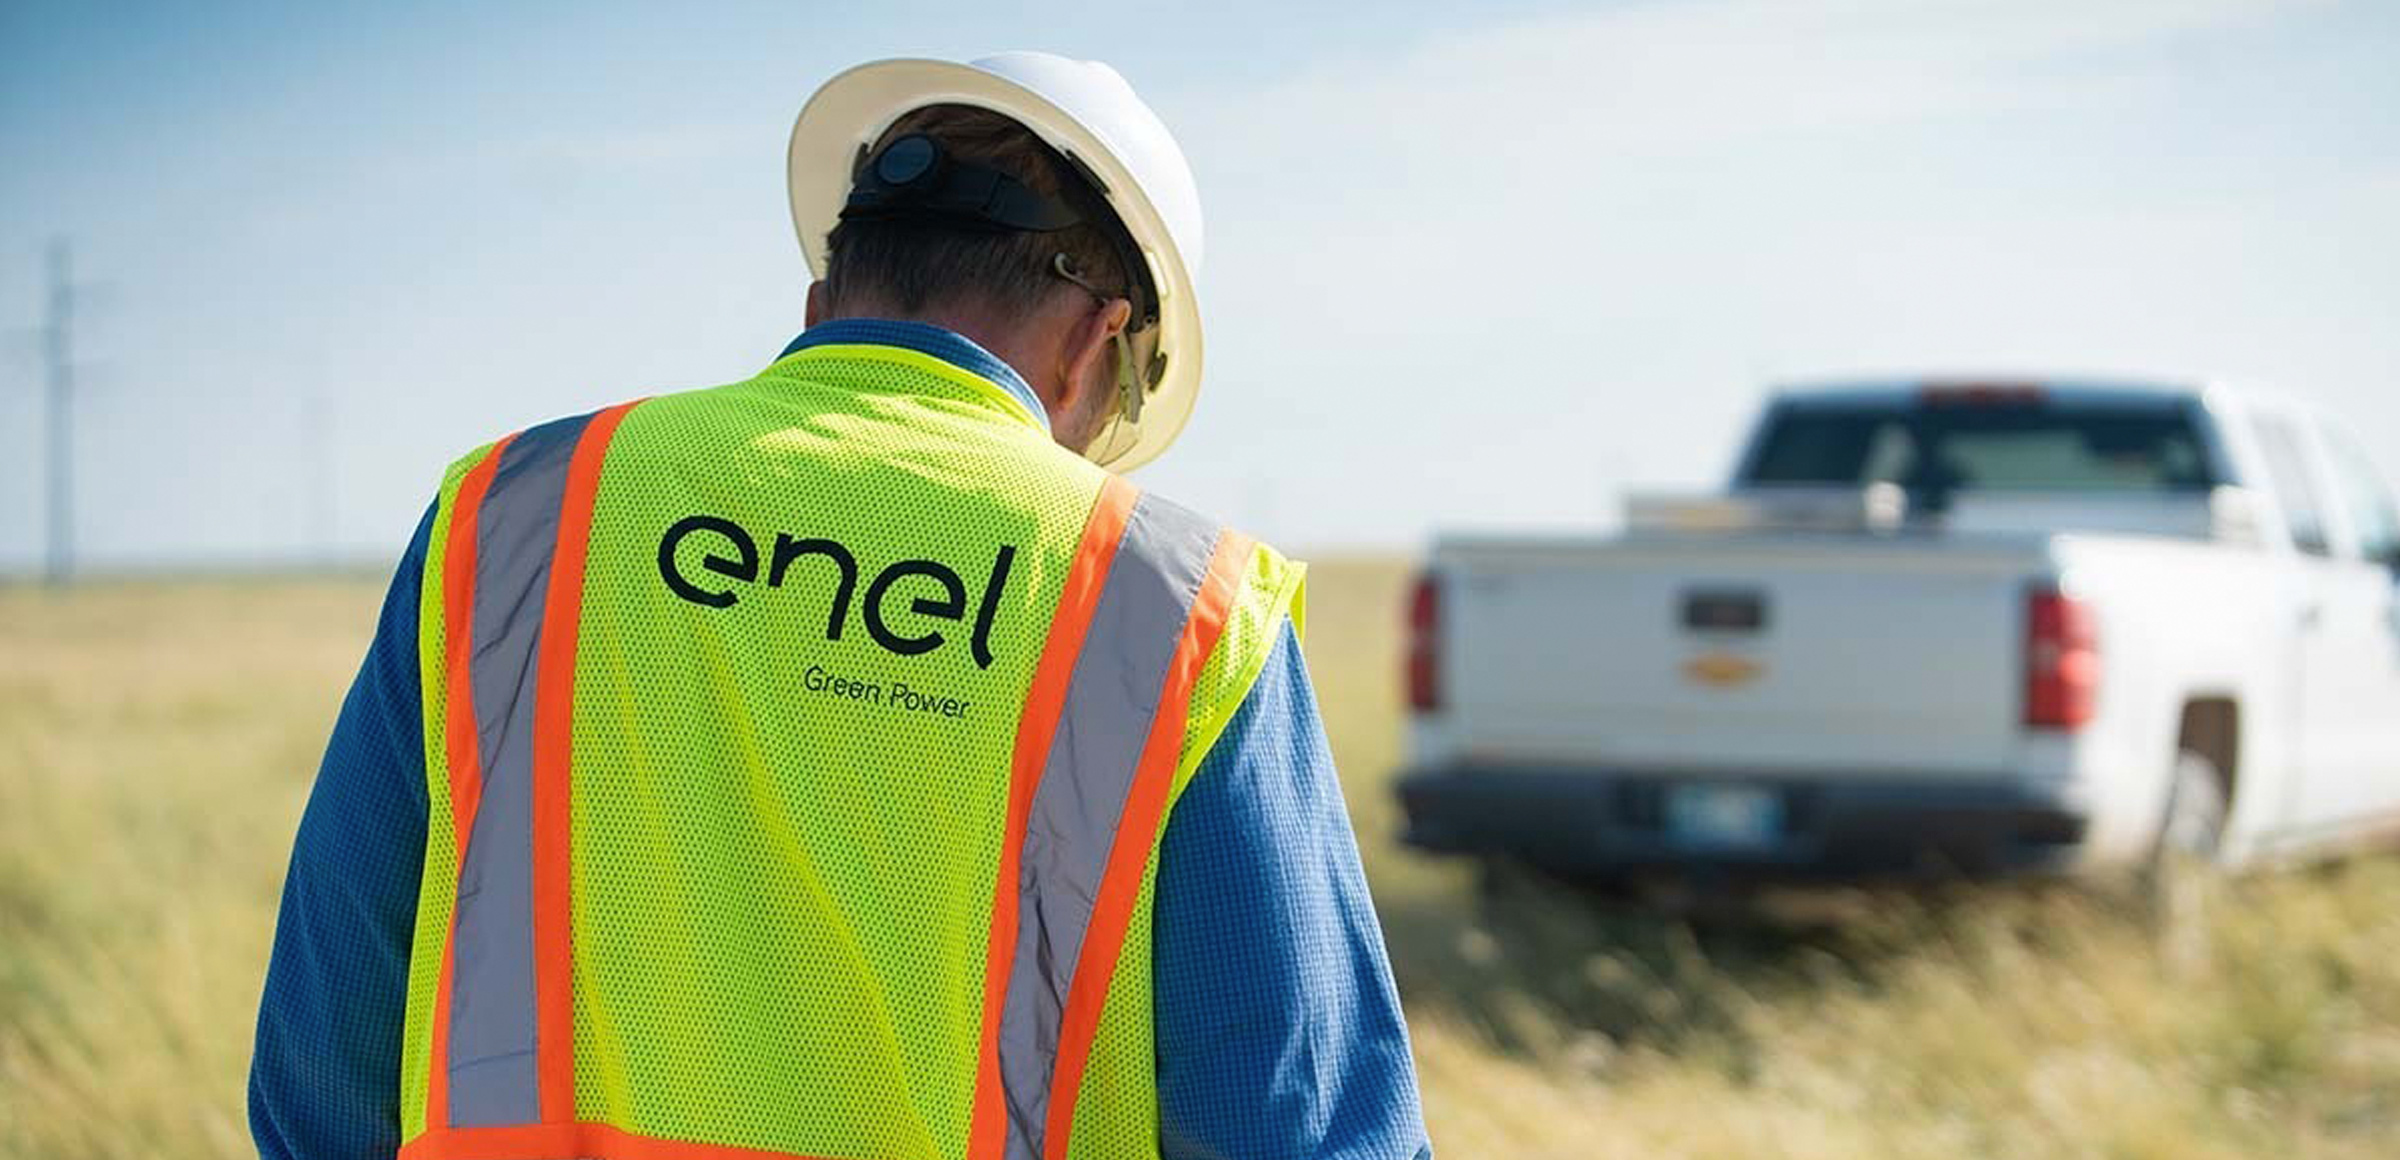 Our Part to Build the Clean Energy Workforce of the Future | Enel Green